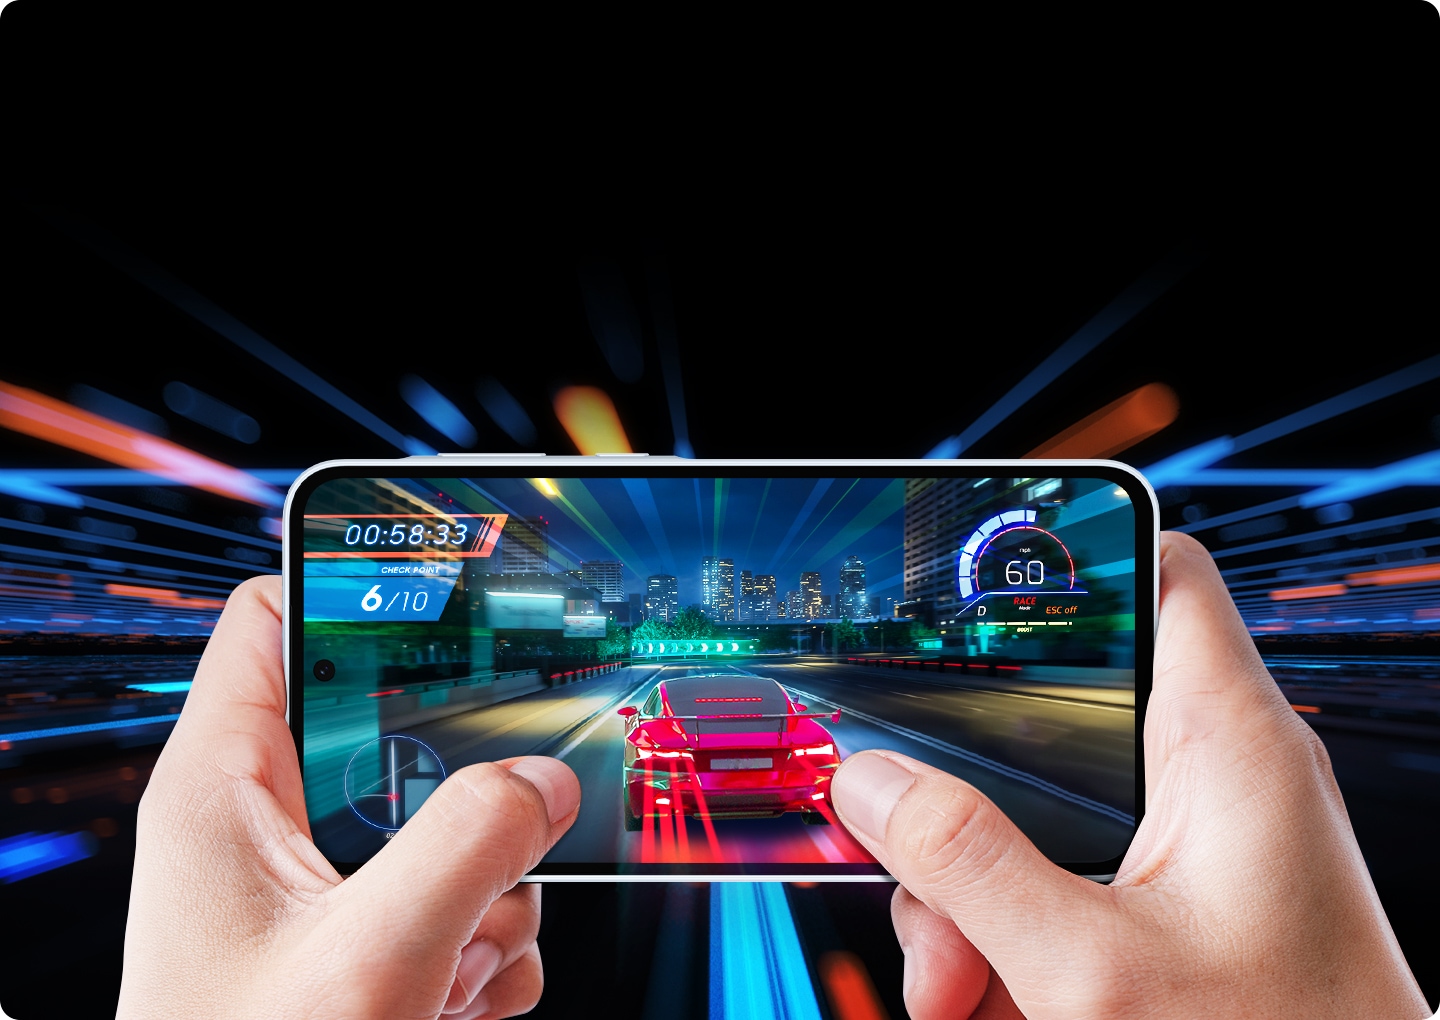 First-person view of a racing game being played on a smartphone held in two hands. The game displays a red sports car speeding on a city highway at night.